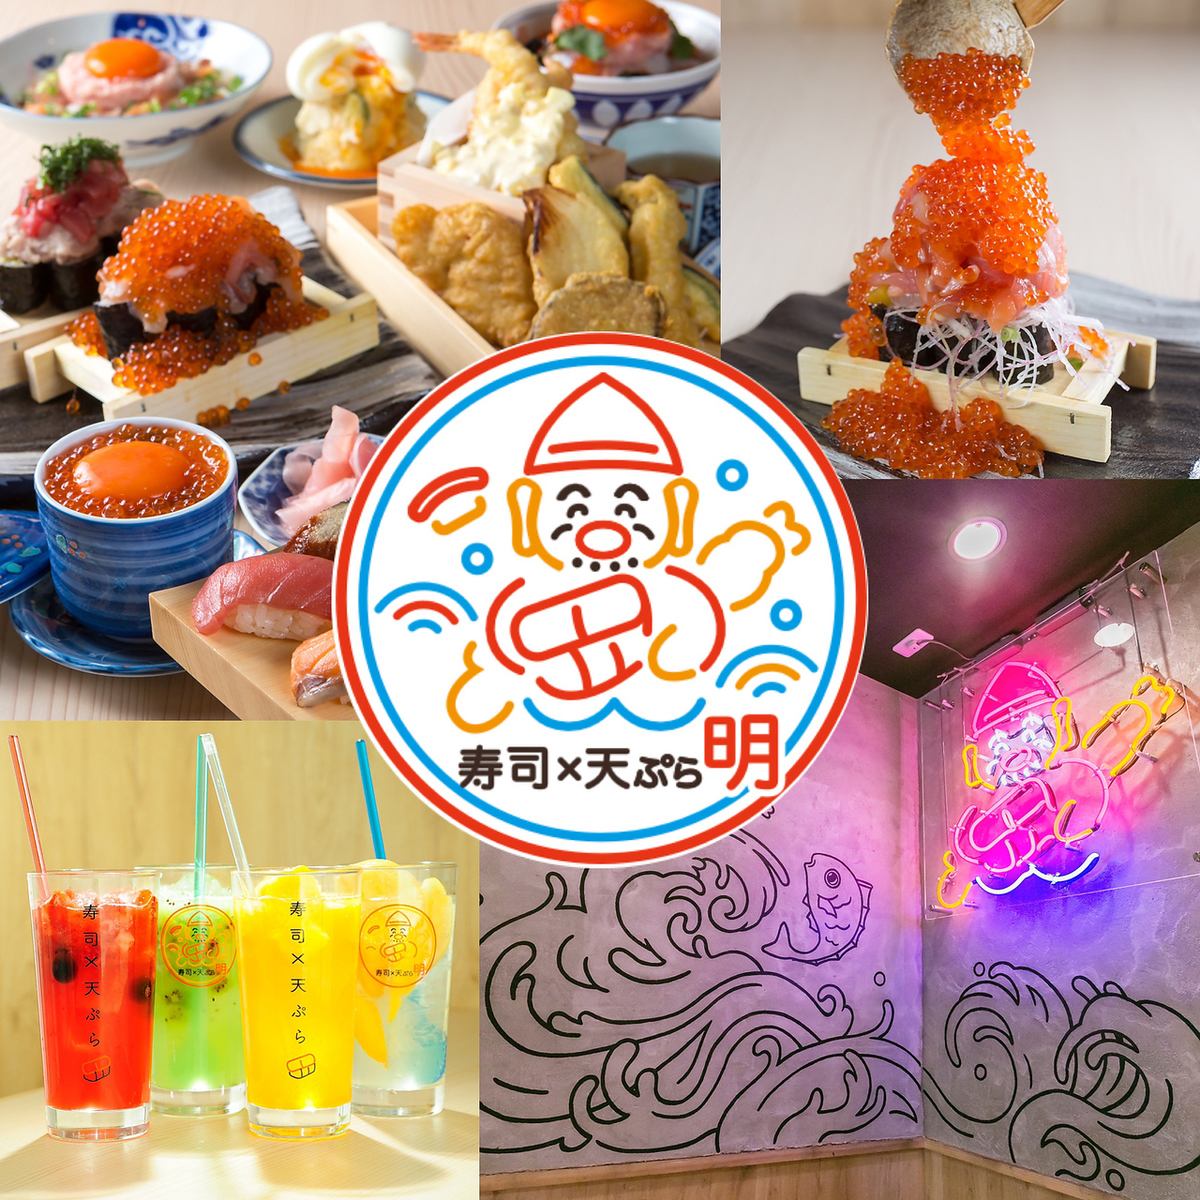 Based on the concept of delicious to look at and delicious to eat♪ A popular sushi x tempura bar that looks good, tastes good, and is good value for money.